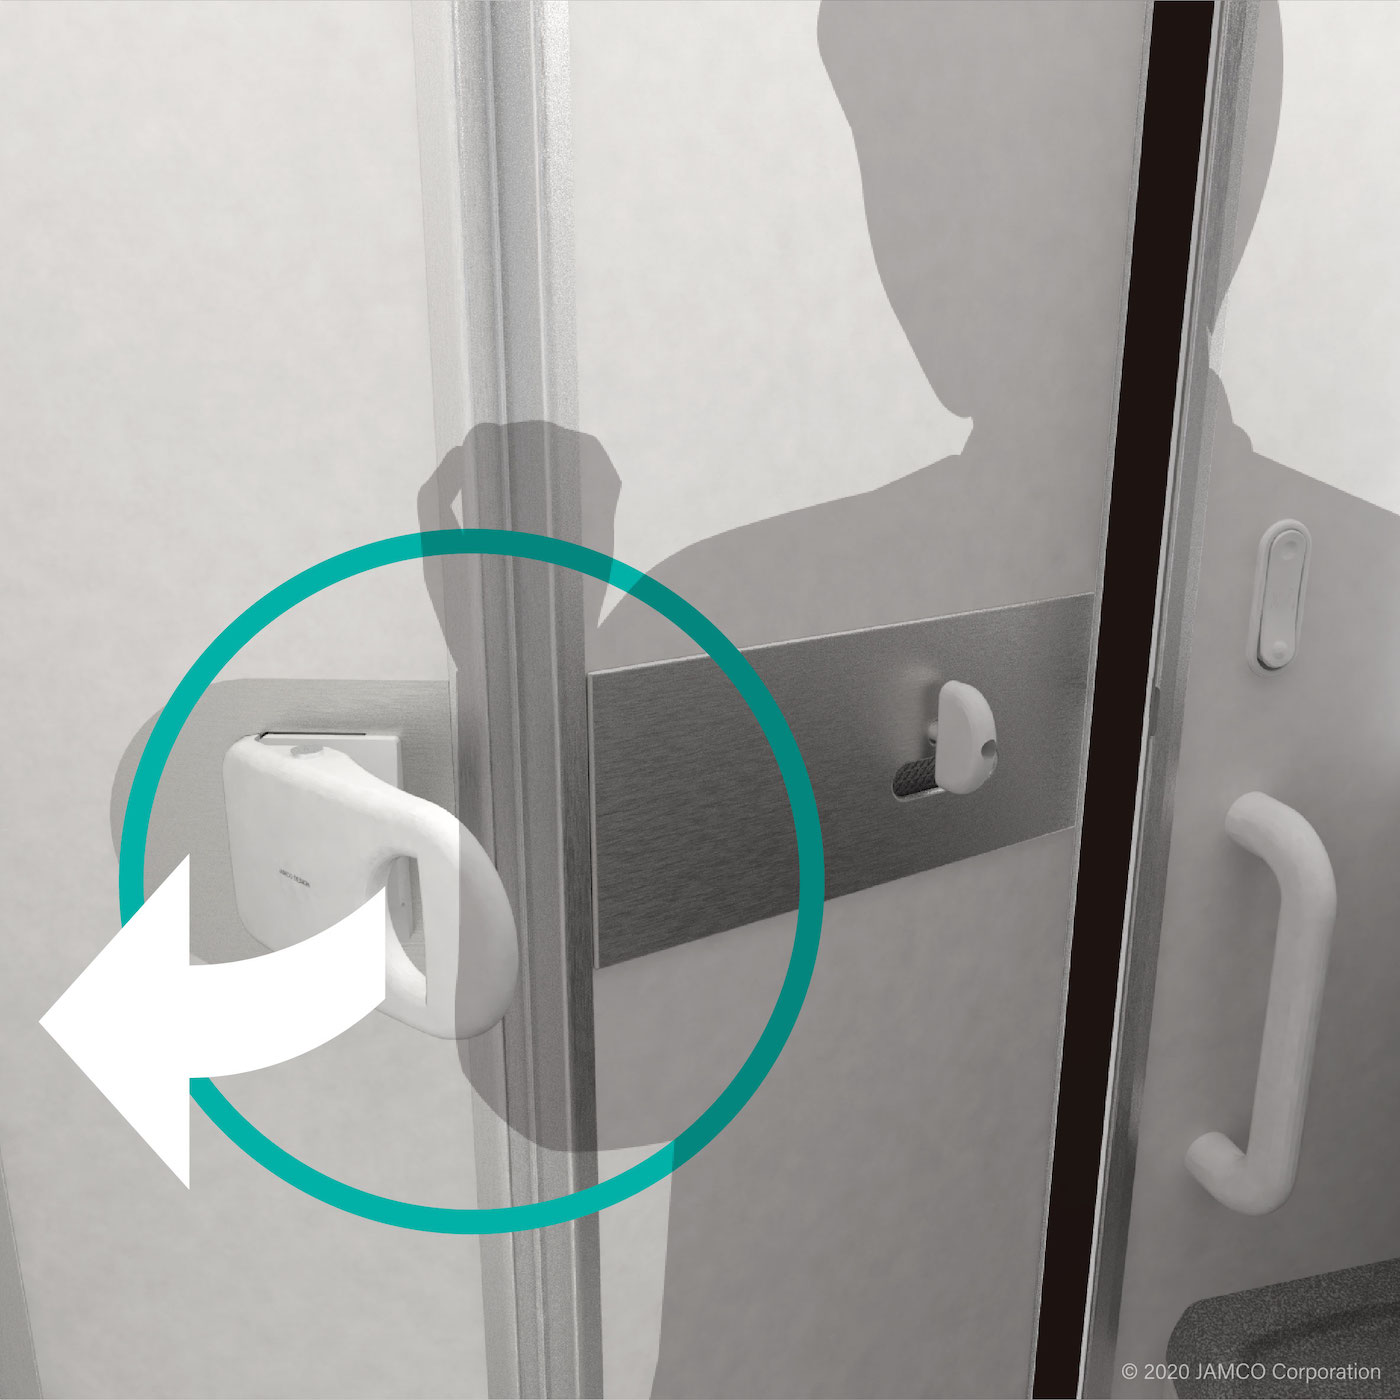 The lavatory door handle can be operated using the forearm